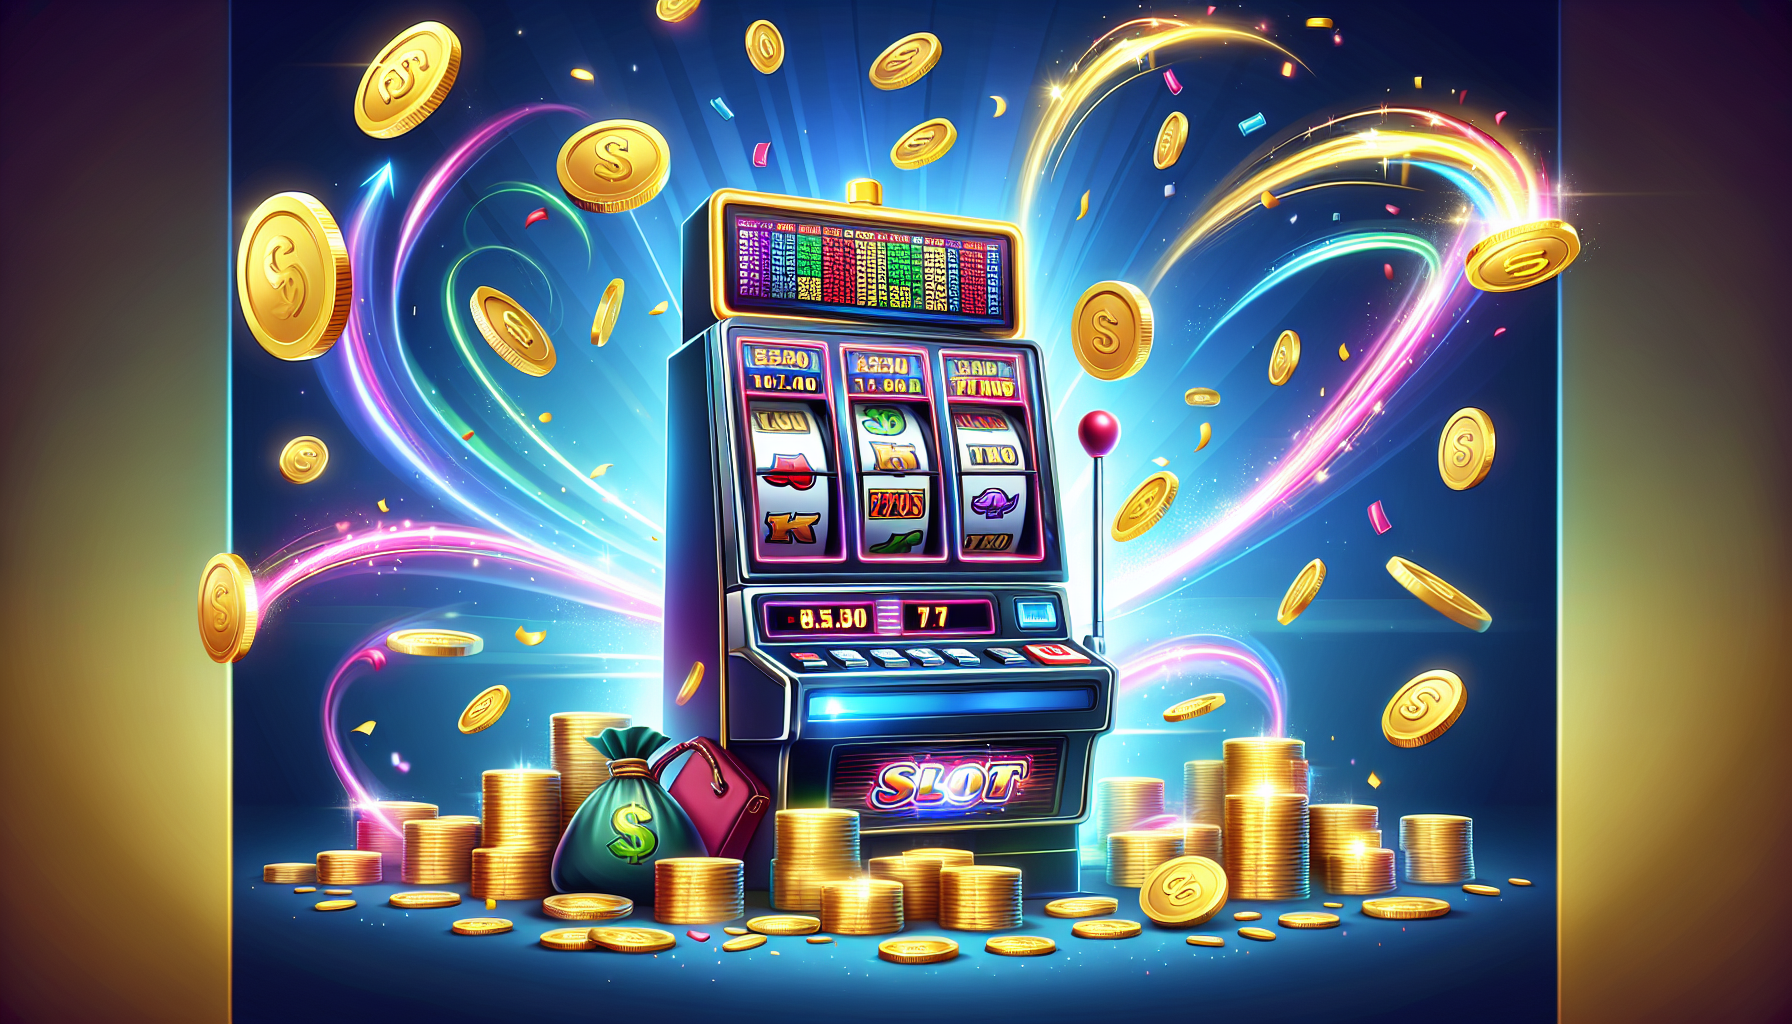 Can I Play Online Slots For Real Money?